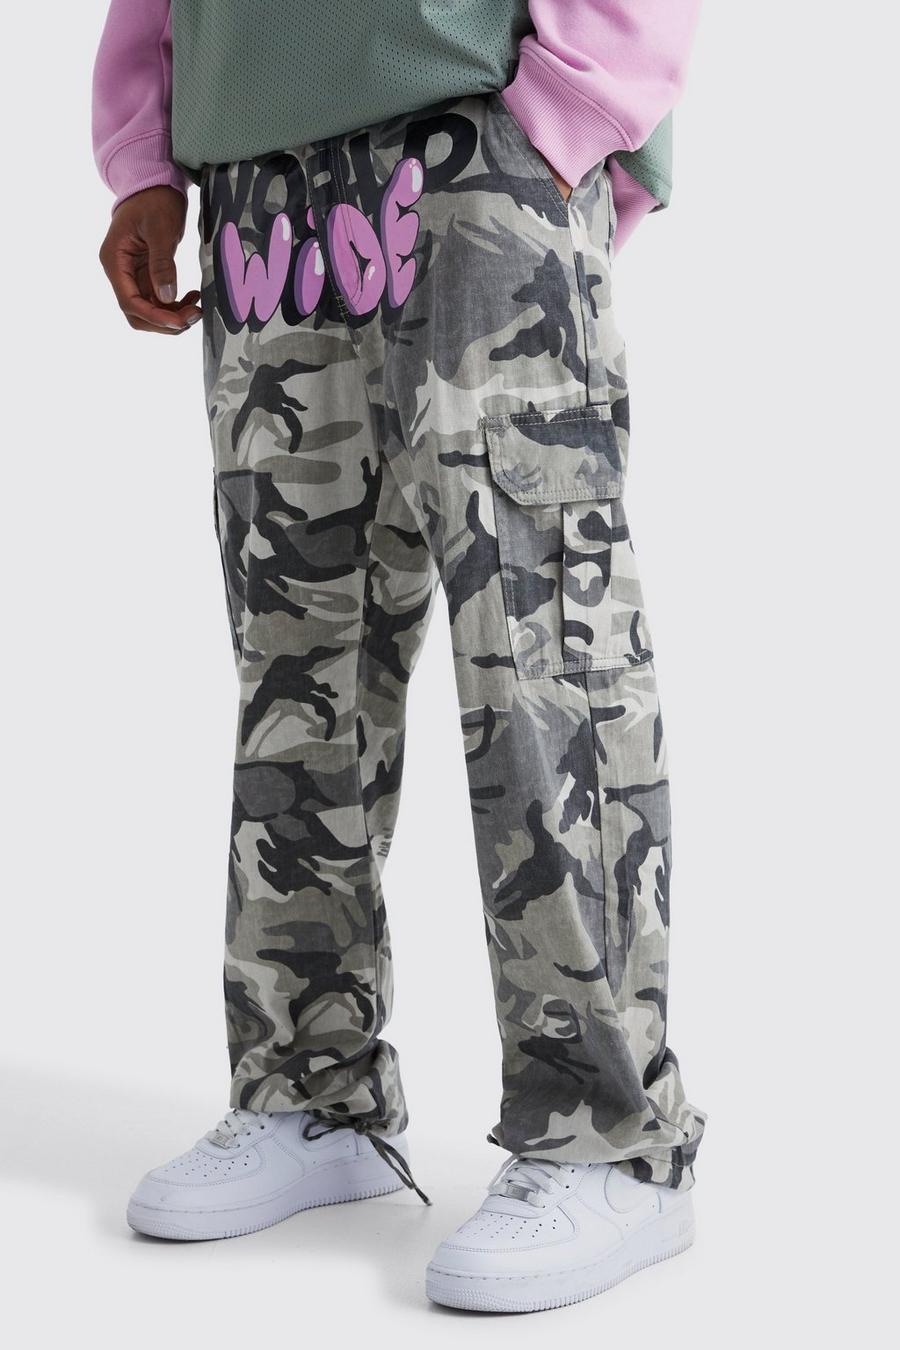 Charcoal grey Relaxed Crotch Print Tie Hem Camo Cargo Trouser